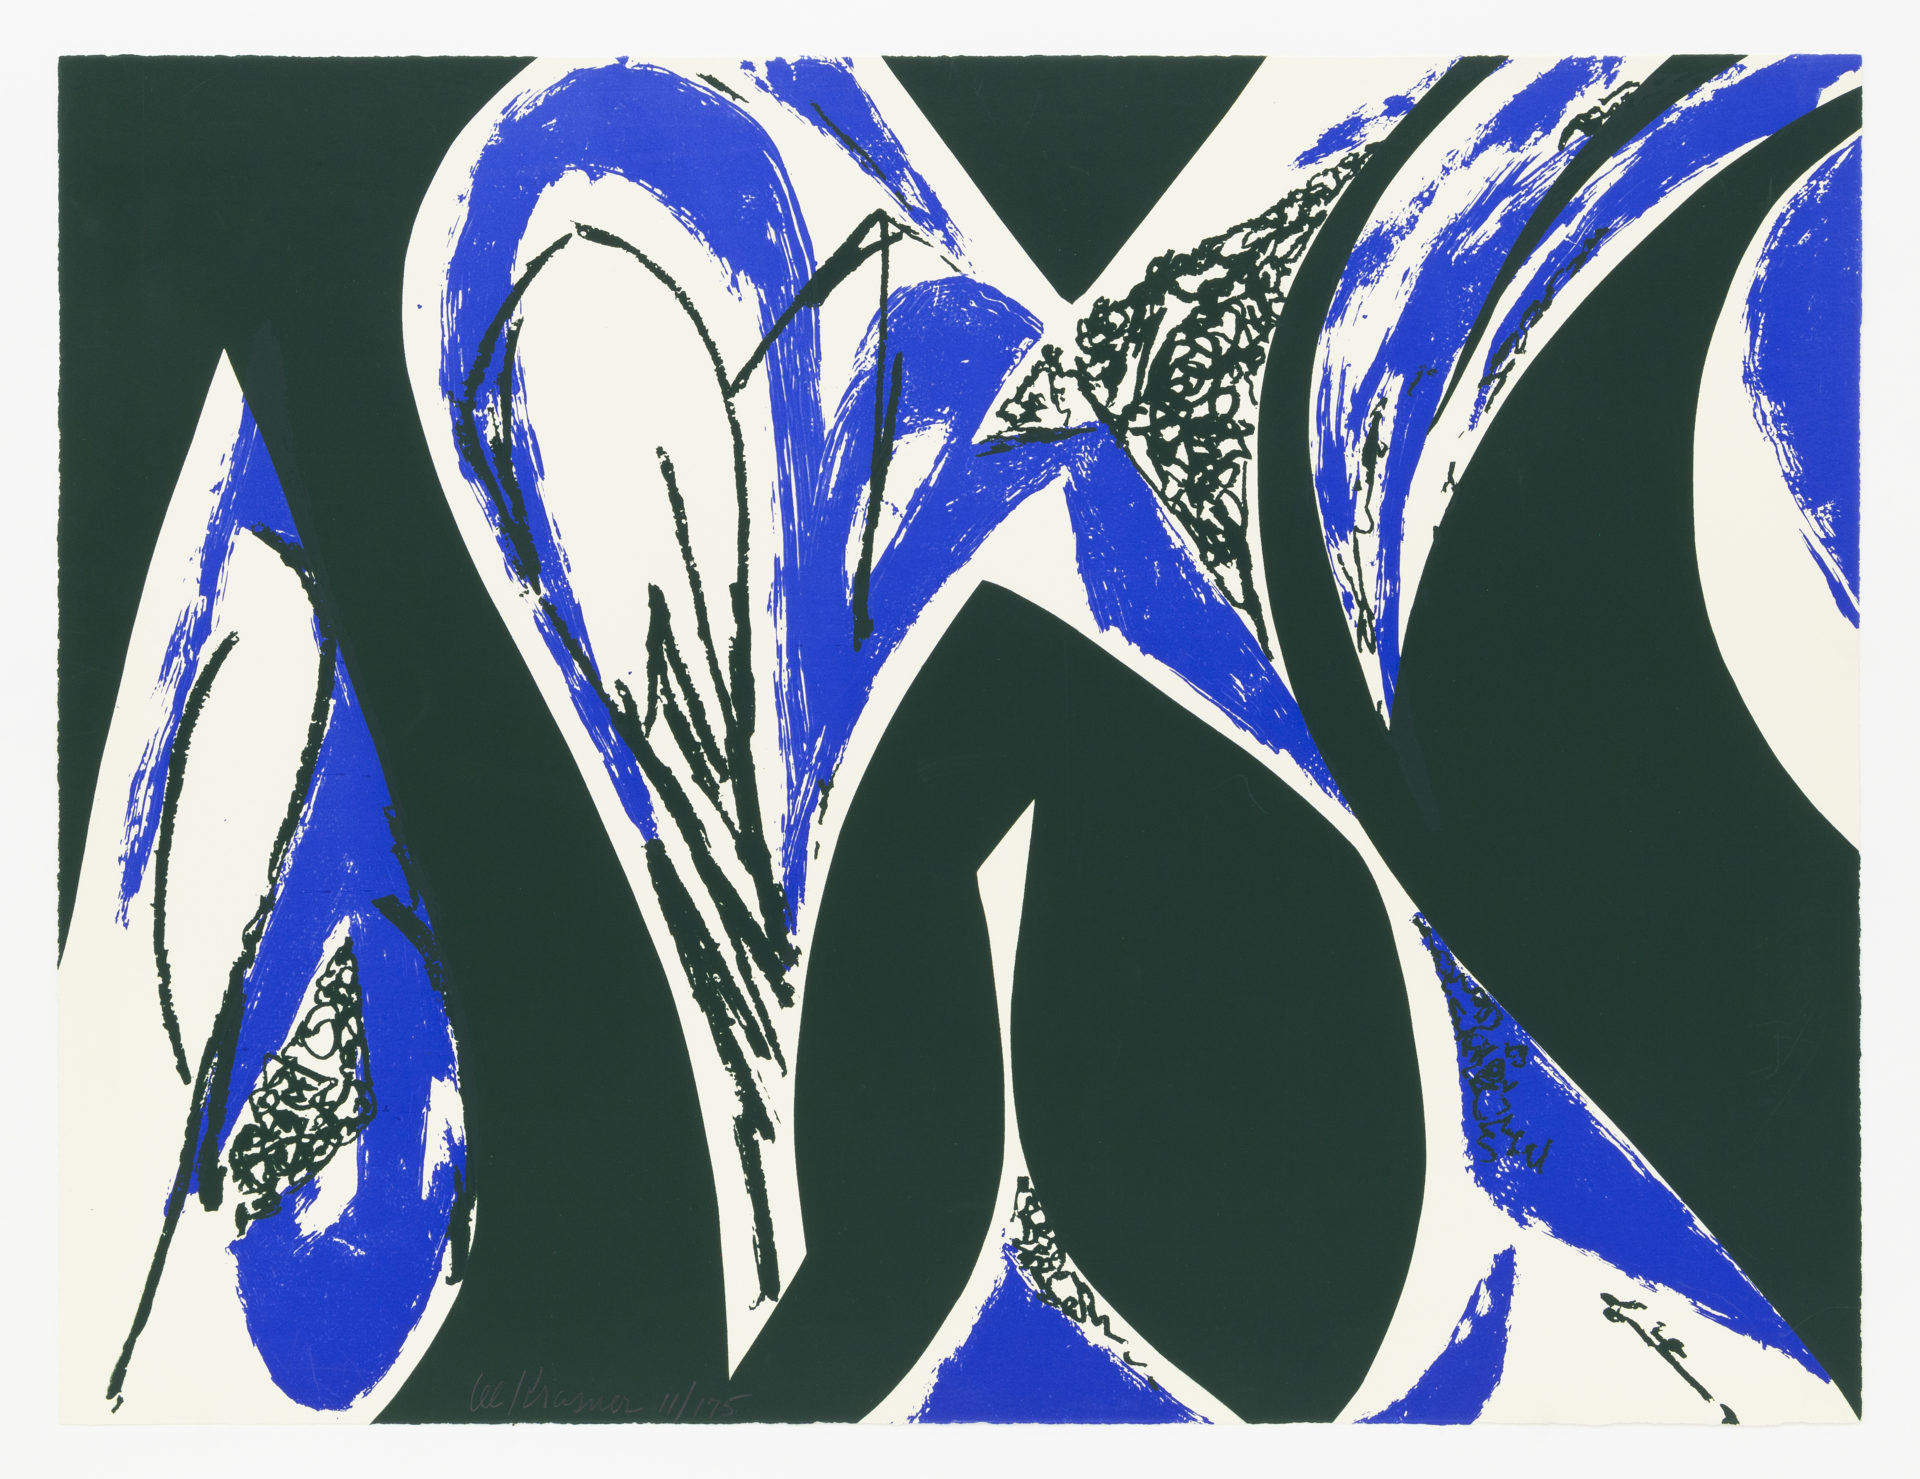 Free Space (blue), 1975 Silkscreen 19 1/2 x 26 inches (49.5 x 66 cm) Edition of 175